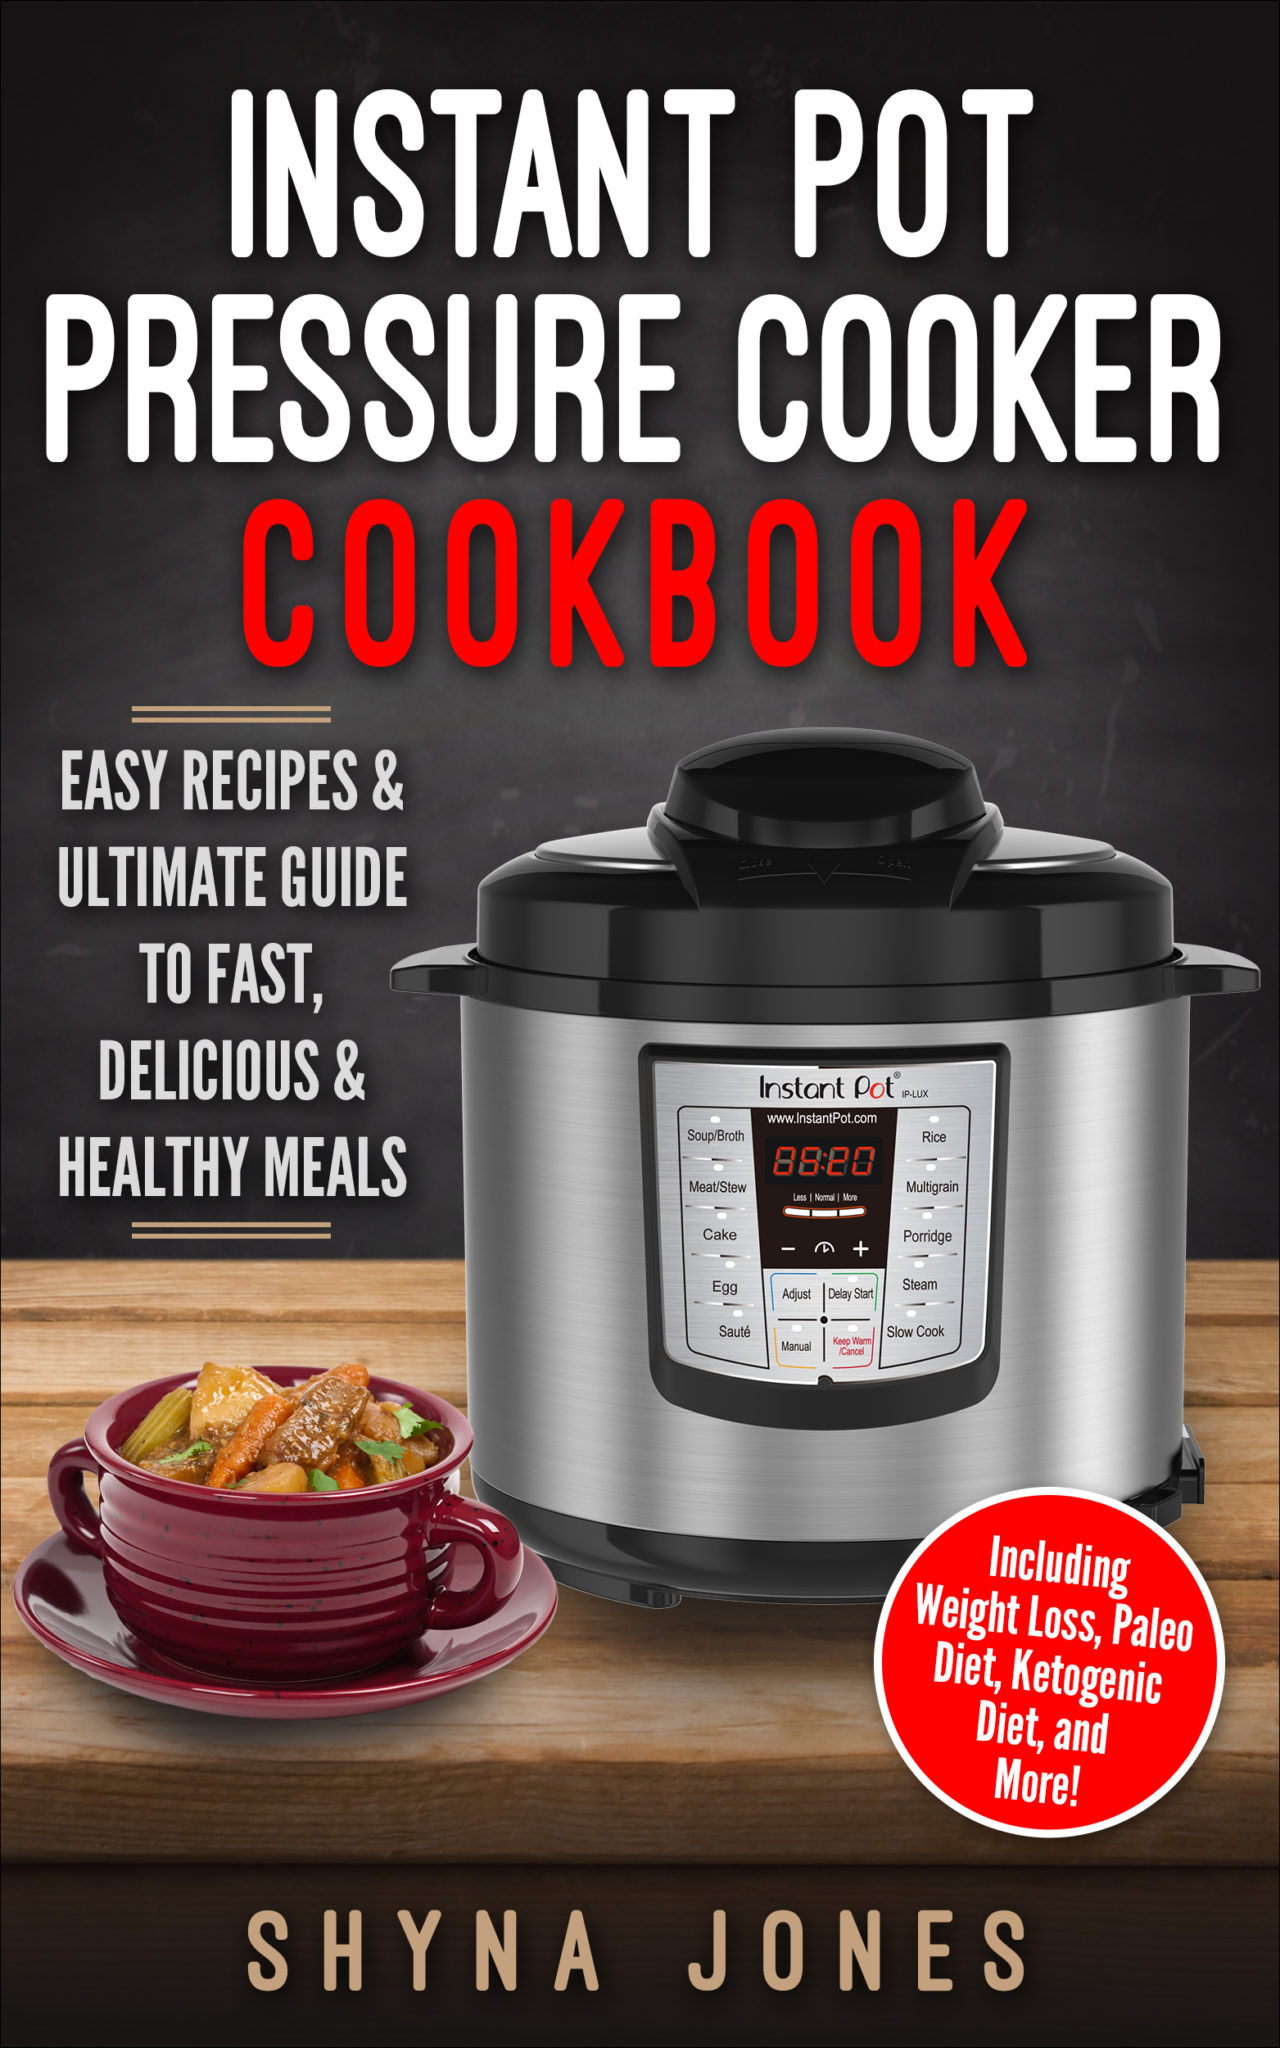 FREE: Instant Pot Pressure Cooker Cookbook: Easy Recipes and the Ultimate Guide to Fast, Delicious, and Healthy Meals by Shyna Jones